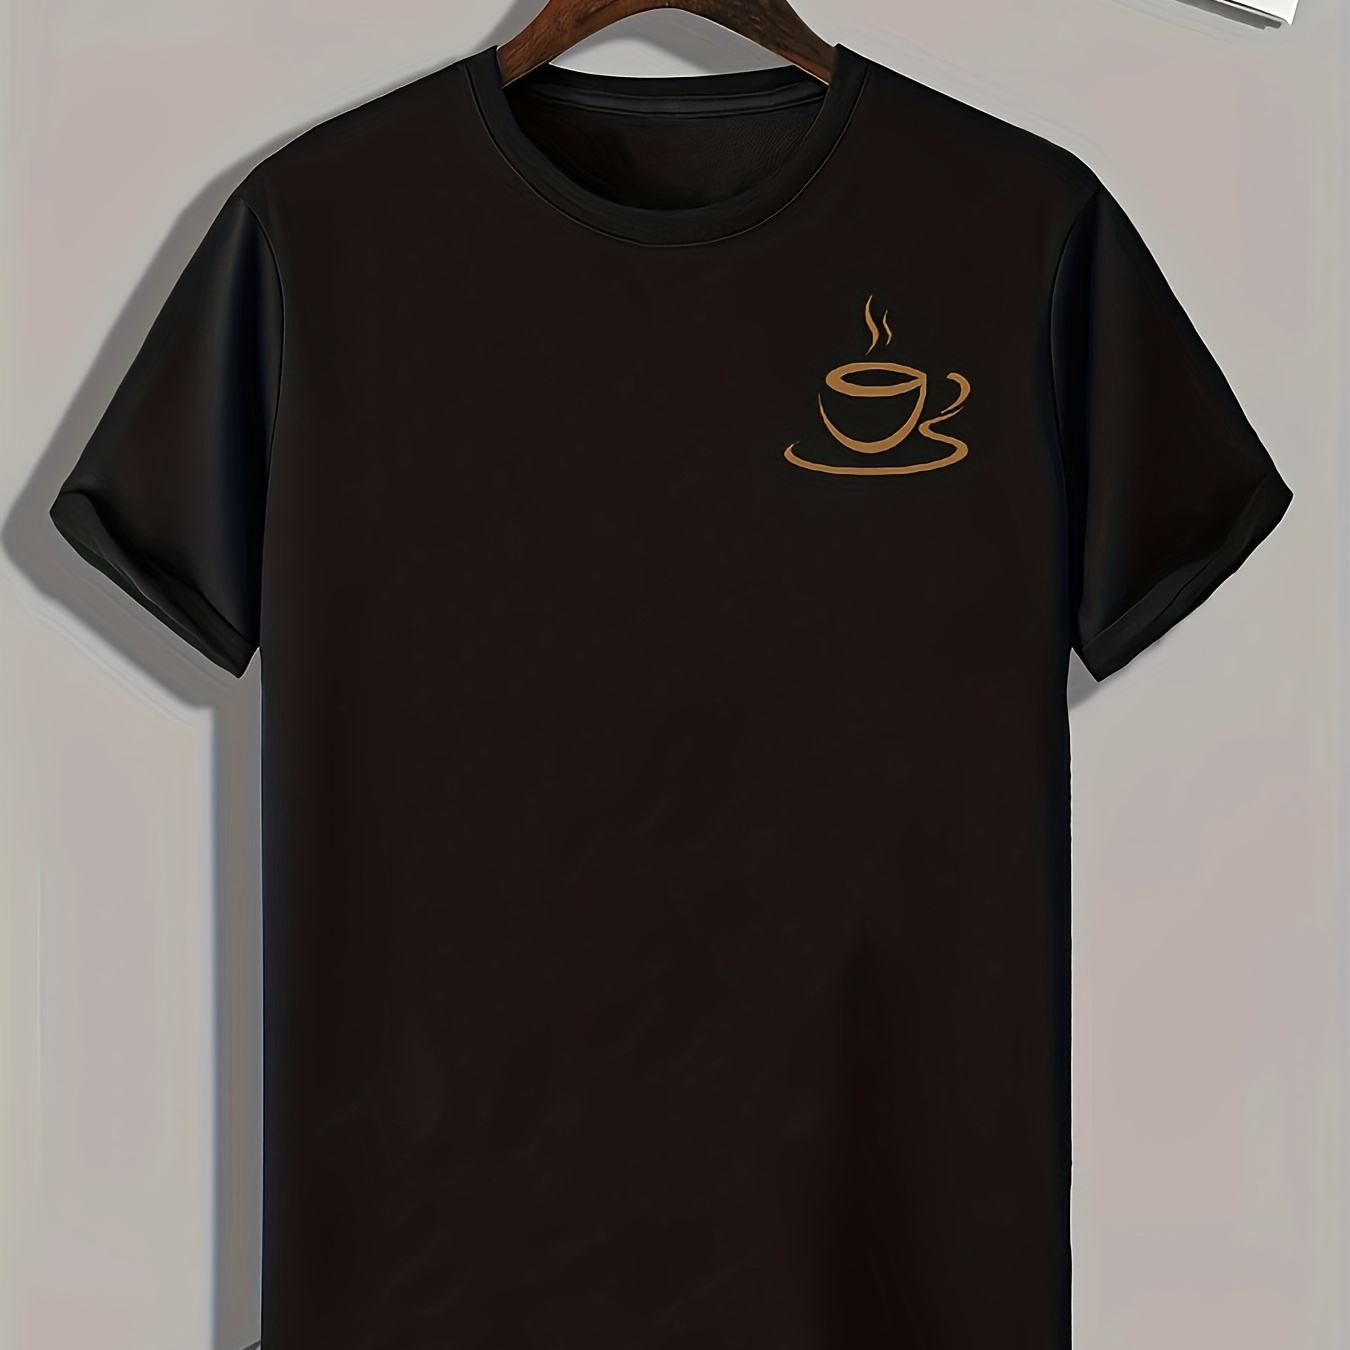 

Cup Of Coffee Print, Men's Trendy Comfy T-shirt, Active Slightly Stretch Breathable Tee For Outdoor Summer